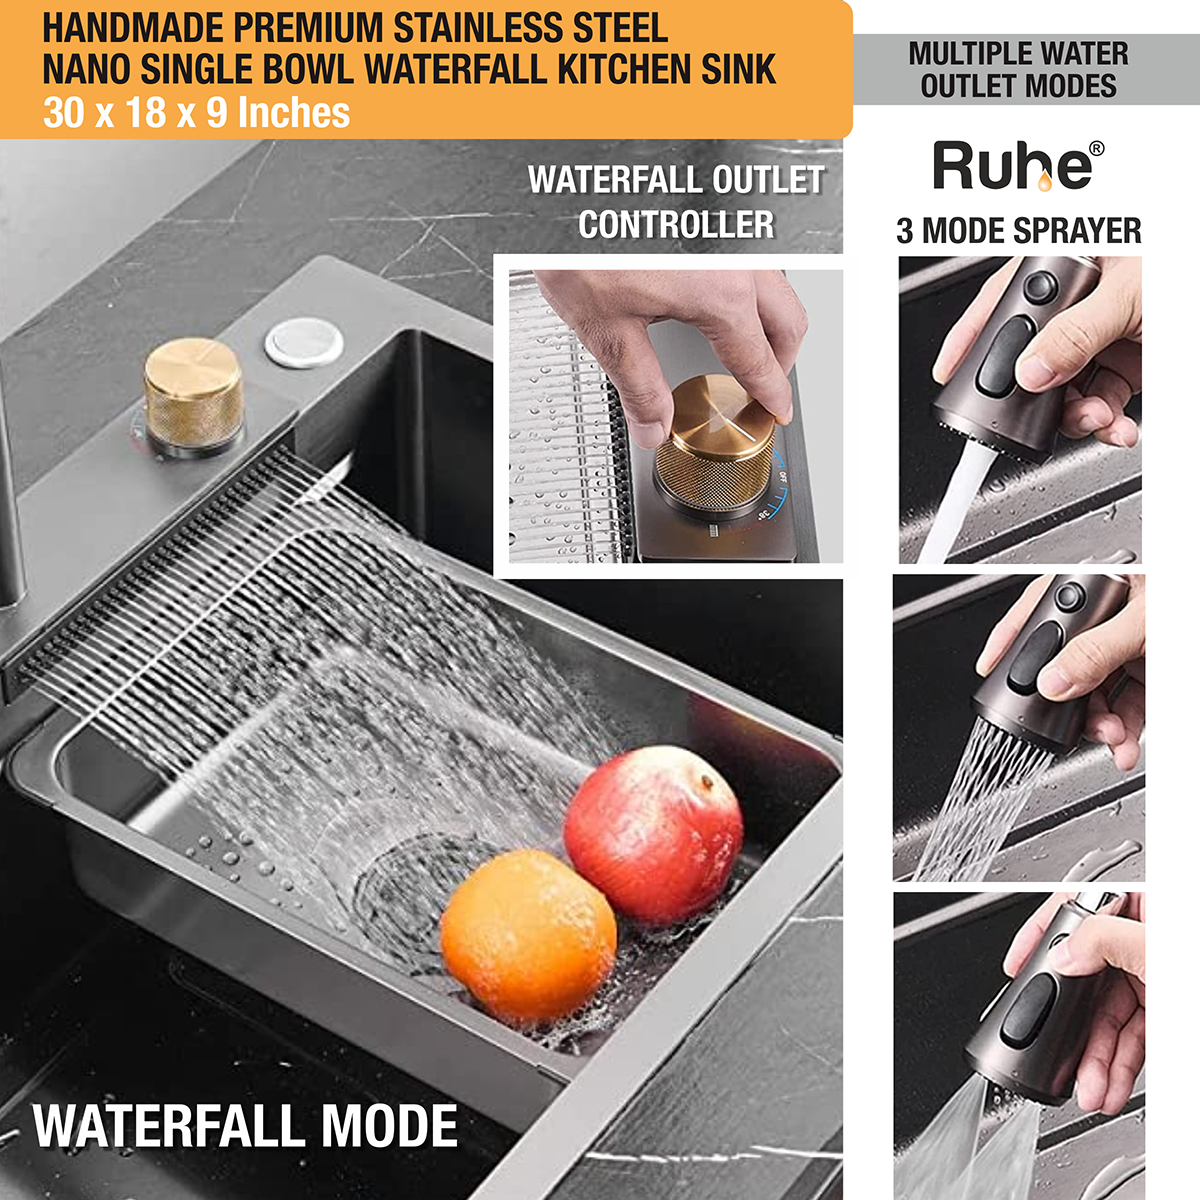  Handmade Premium Nano Kitchen Sink with Integrated Waterfall, Pull-Out & RO Faucet (30 x 18 x 9 Inches) 5